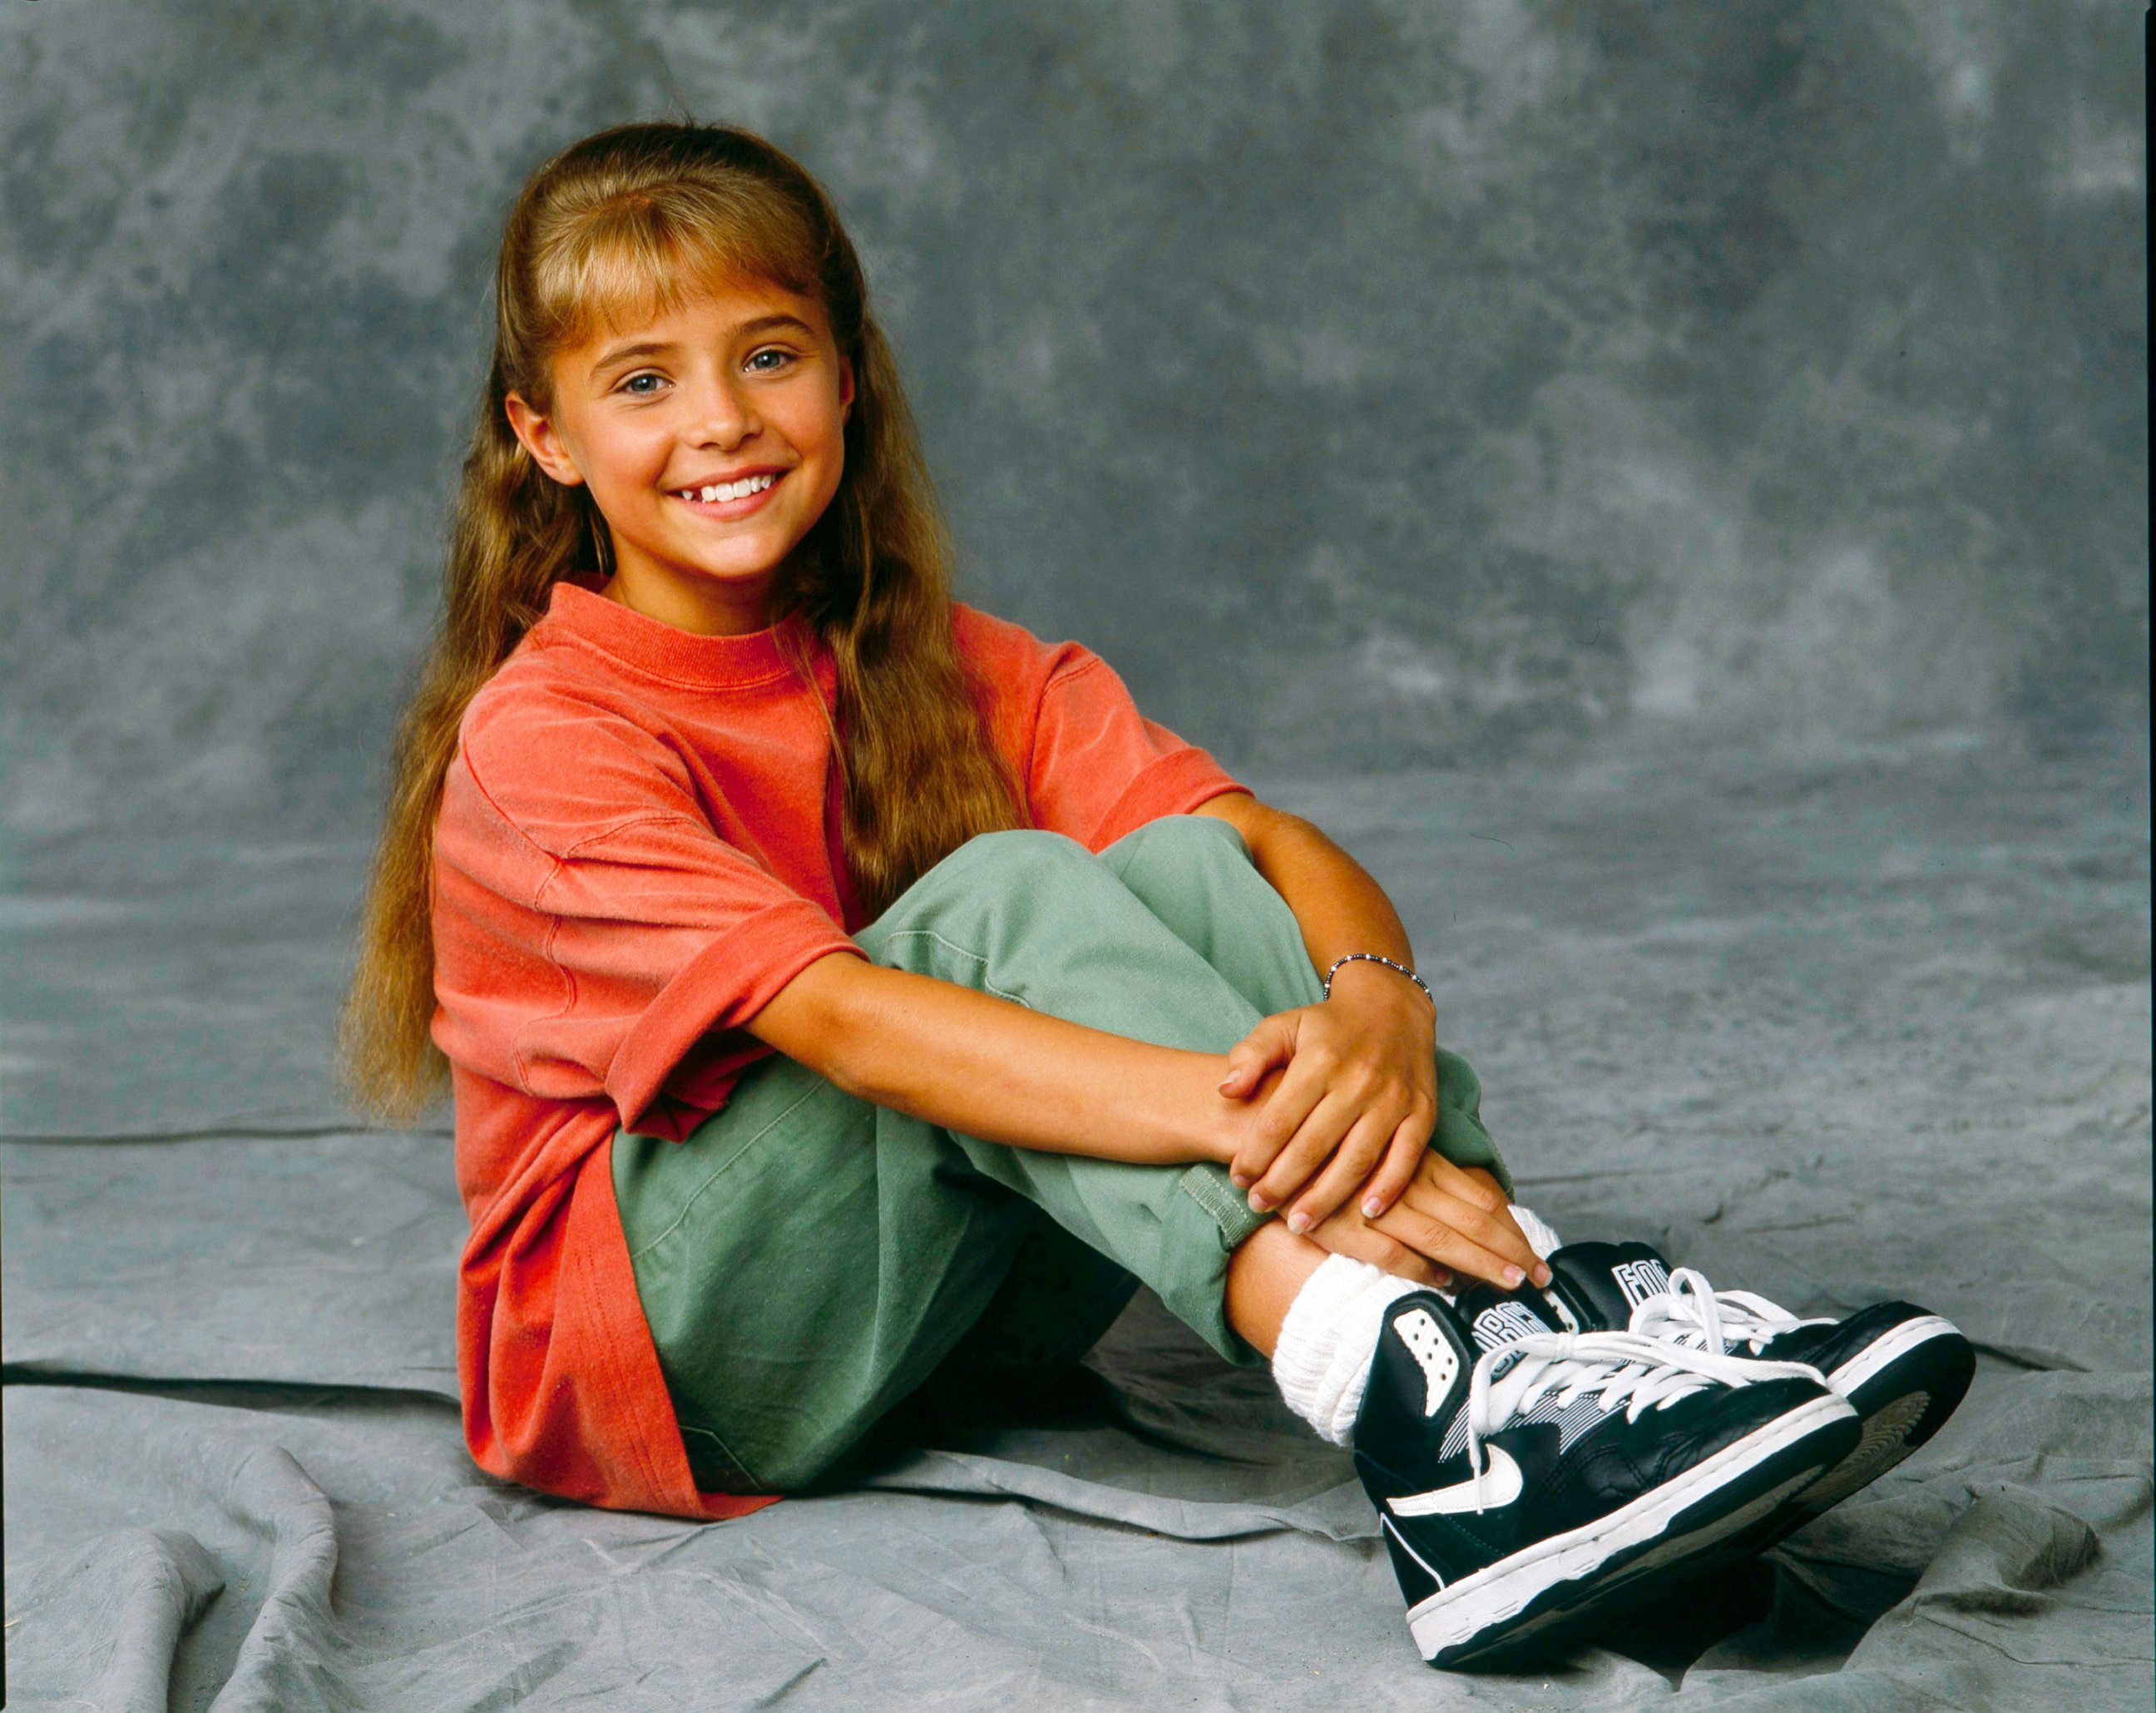 PHOTO: Christine Lakin from "Step By Step."